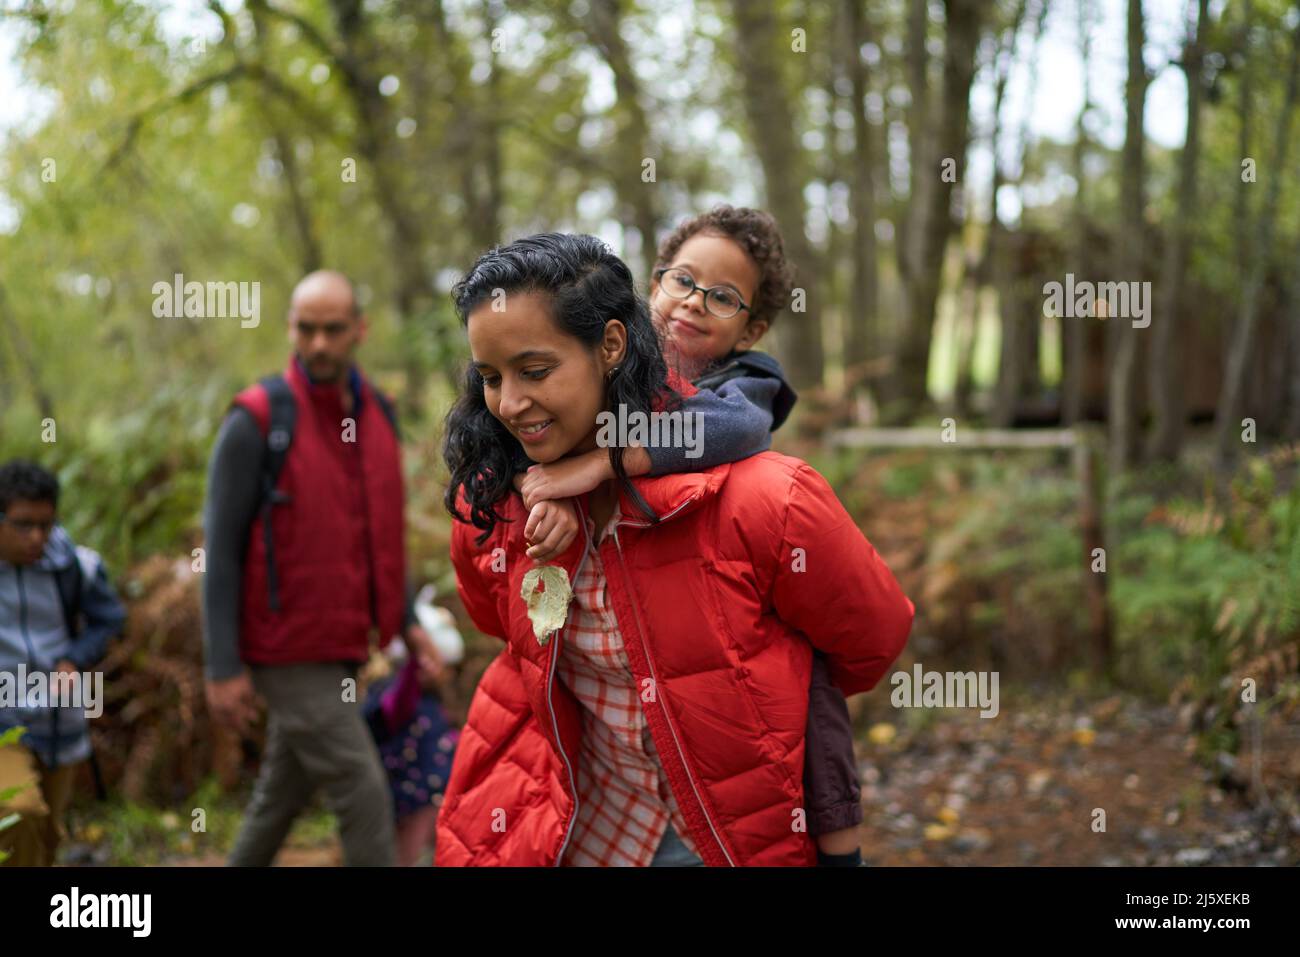 Mother piggybacking son on hike in woods Stock Photo